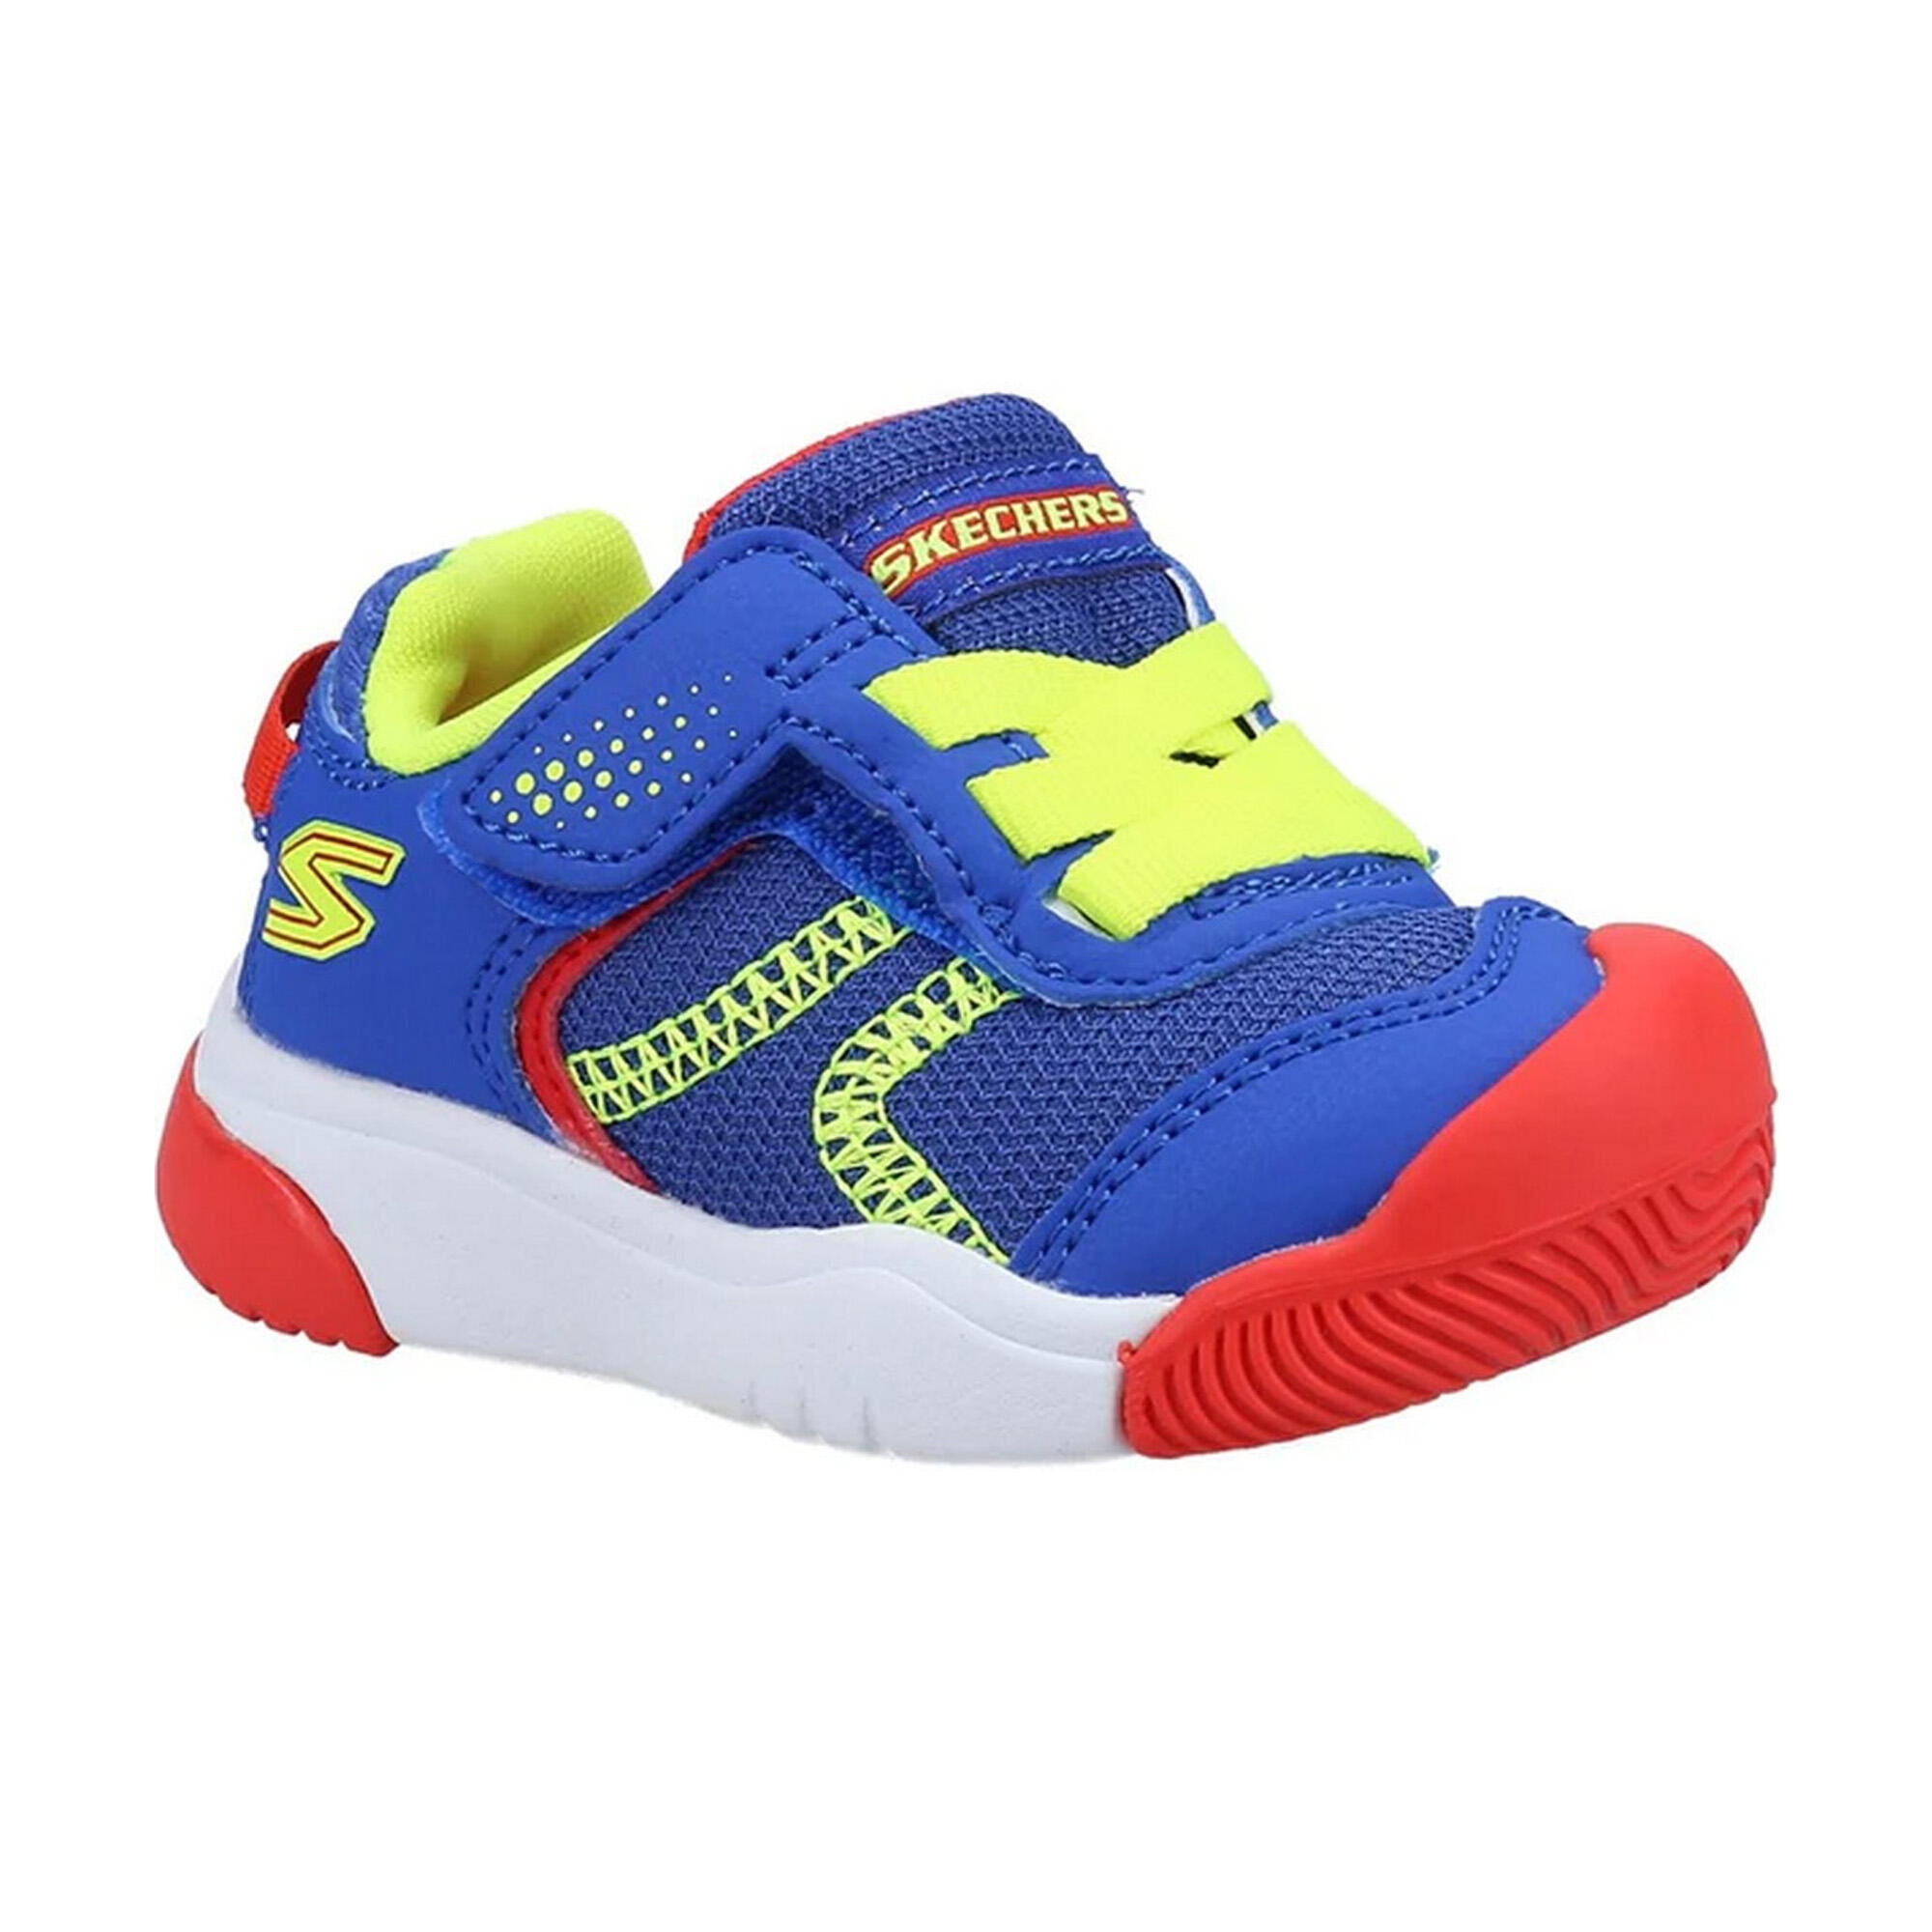 SKECHERS Boys Mighty Toes Lil Tread Trainers (Blue/Multicoloured)